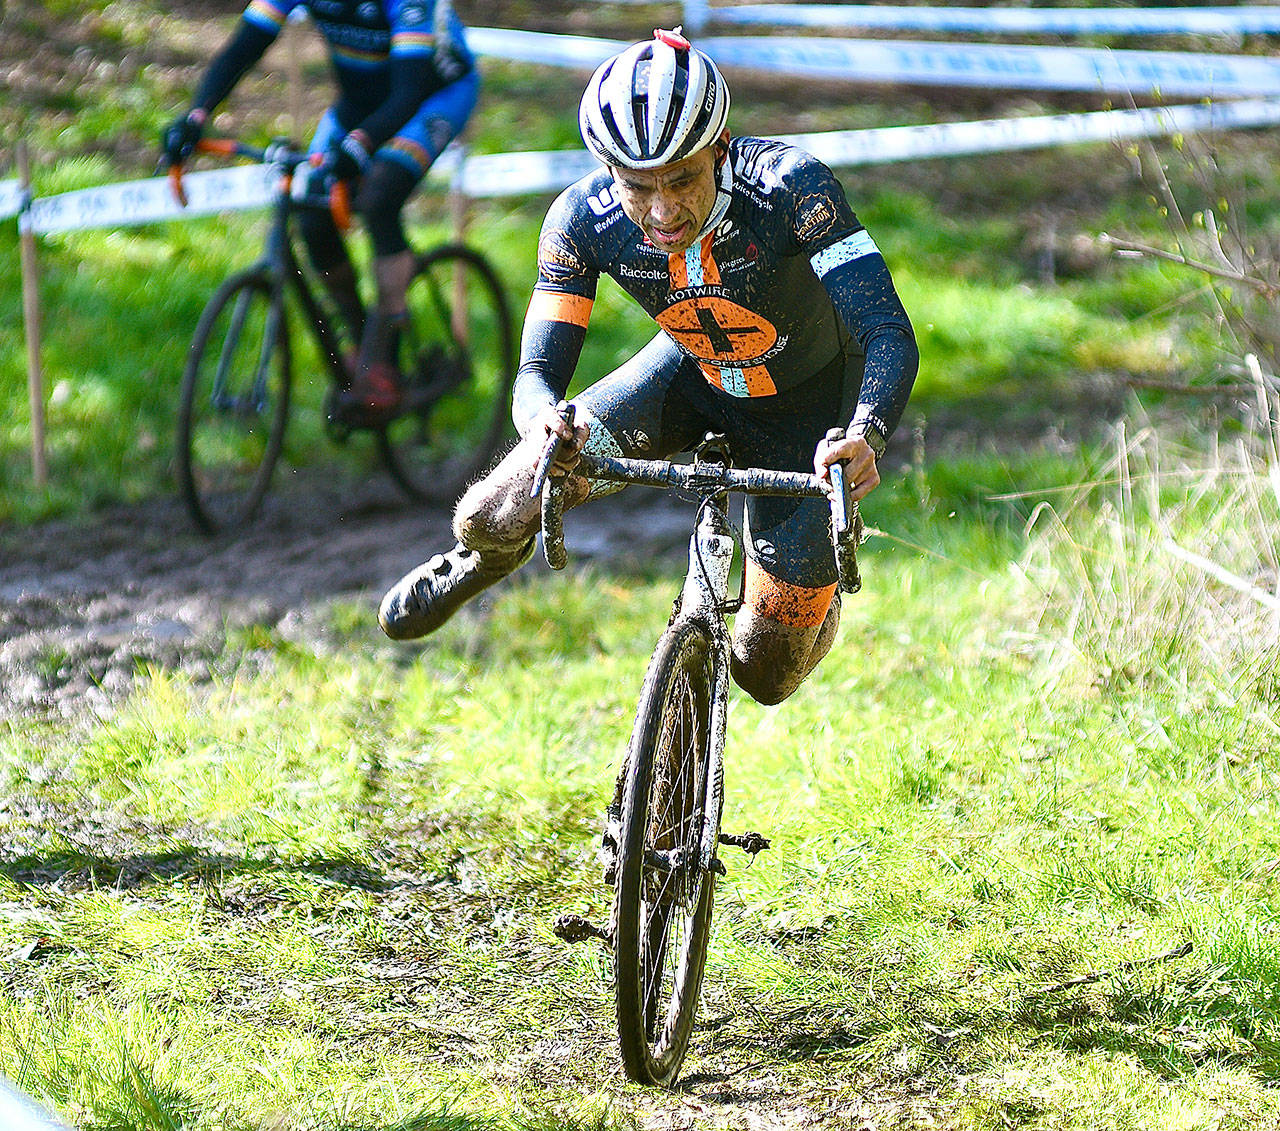 The first “test event” of cyclocross was held at Extreme Sports Park outside of Port Angeles in late March. Races that are part of the normal cyclocross fall circuit are scheduled at the site in October and November. (Photo courtesy of Jay Cline)